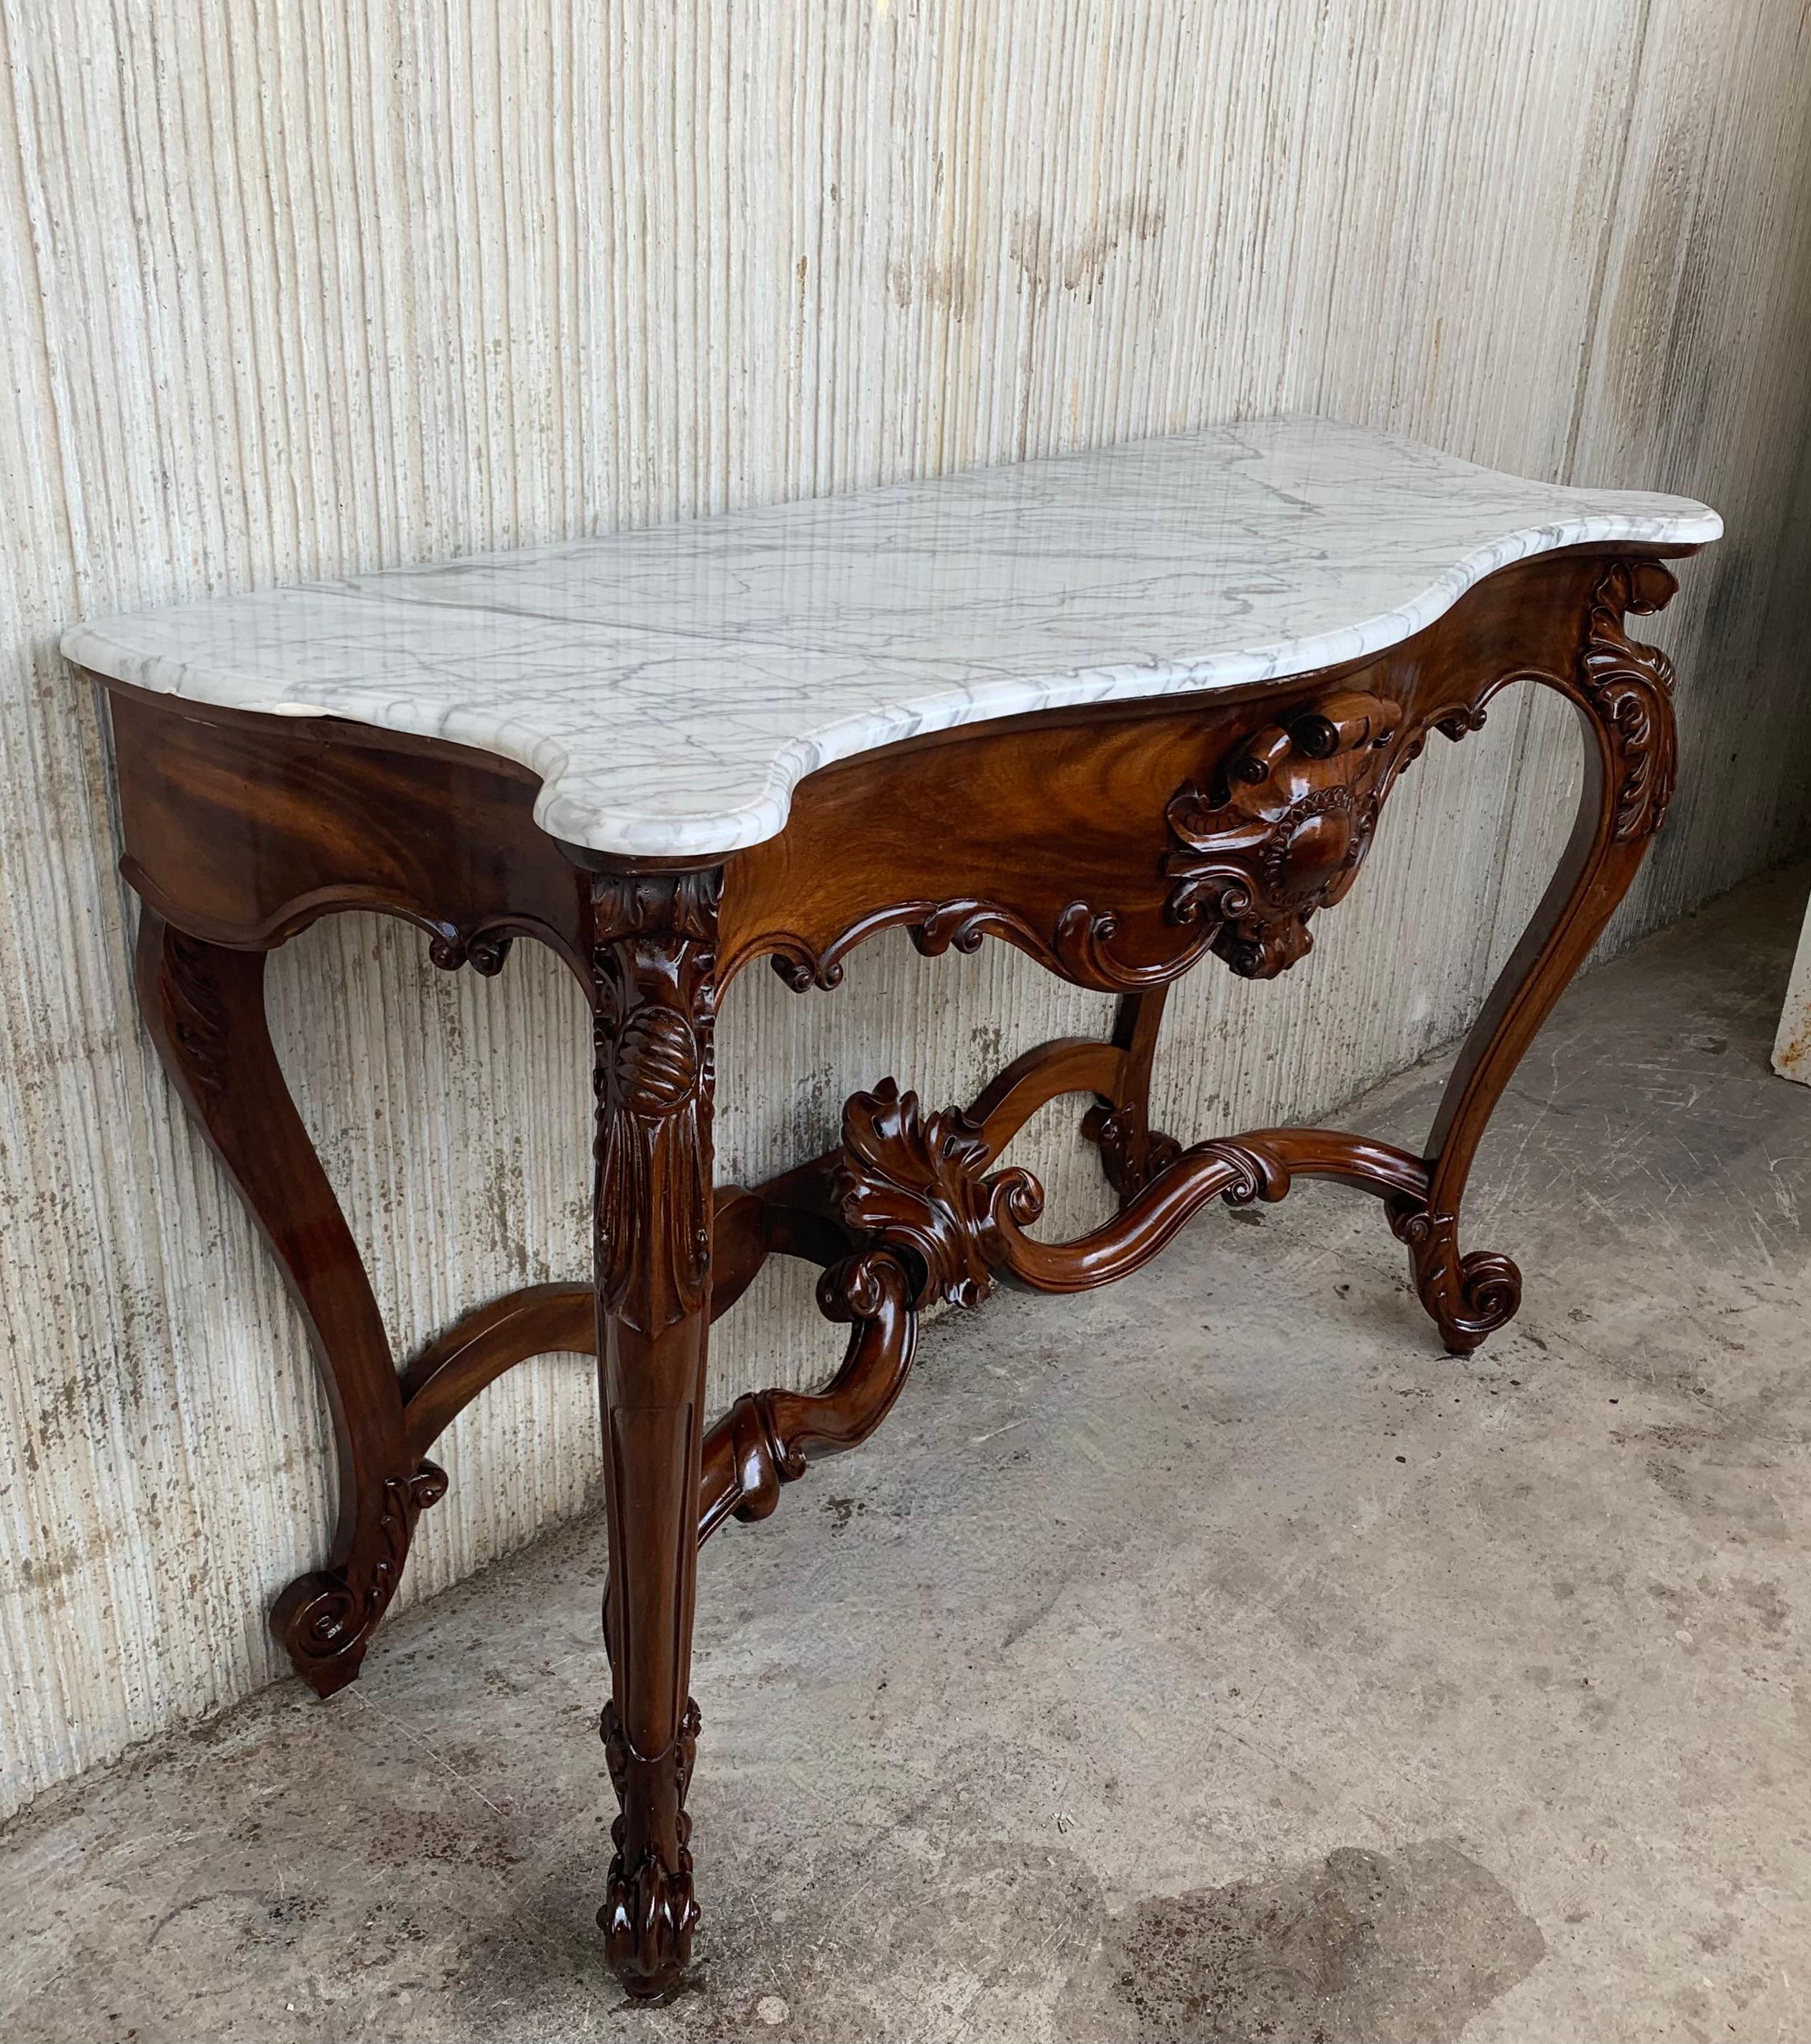 Large French Regency Carved Walnut Console Table with White Marble Top '2 Avai' For Sale 6